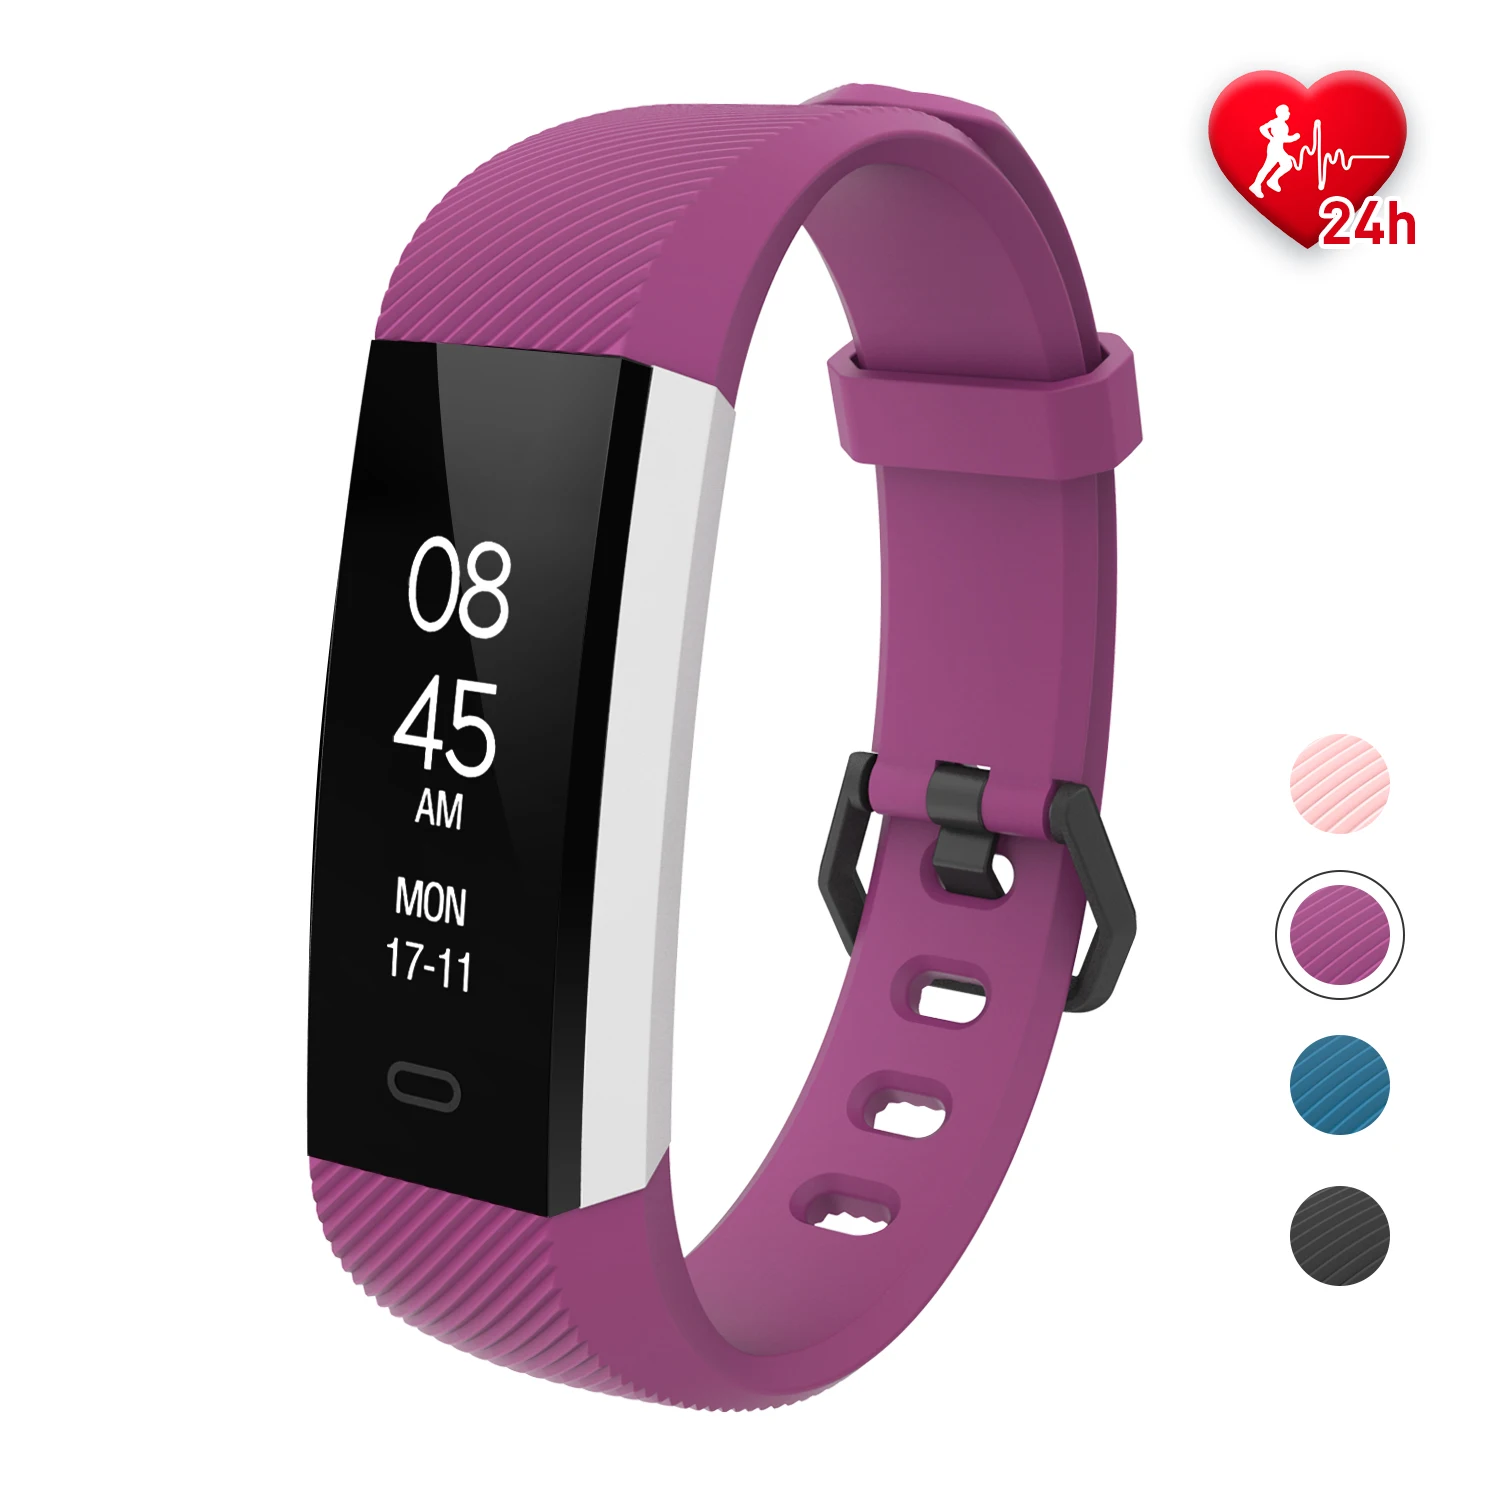 

2019 latest smart wristband smartwatch activity tracker watch with heart rate monitor